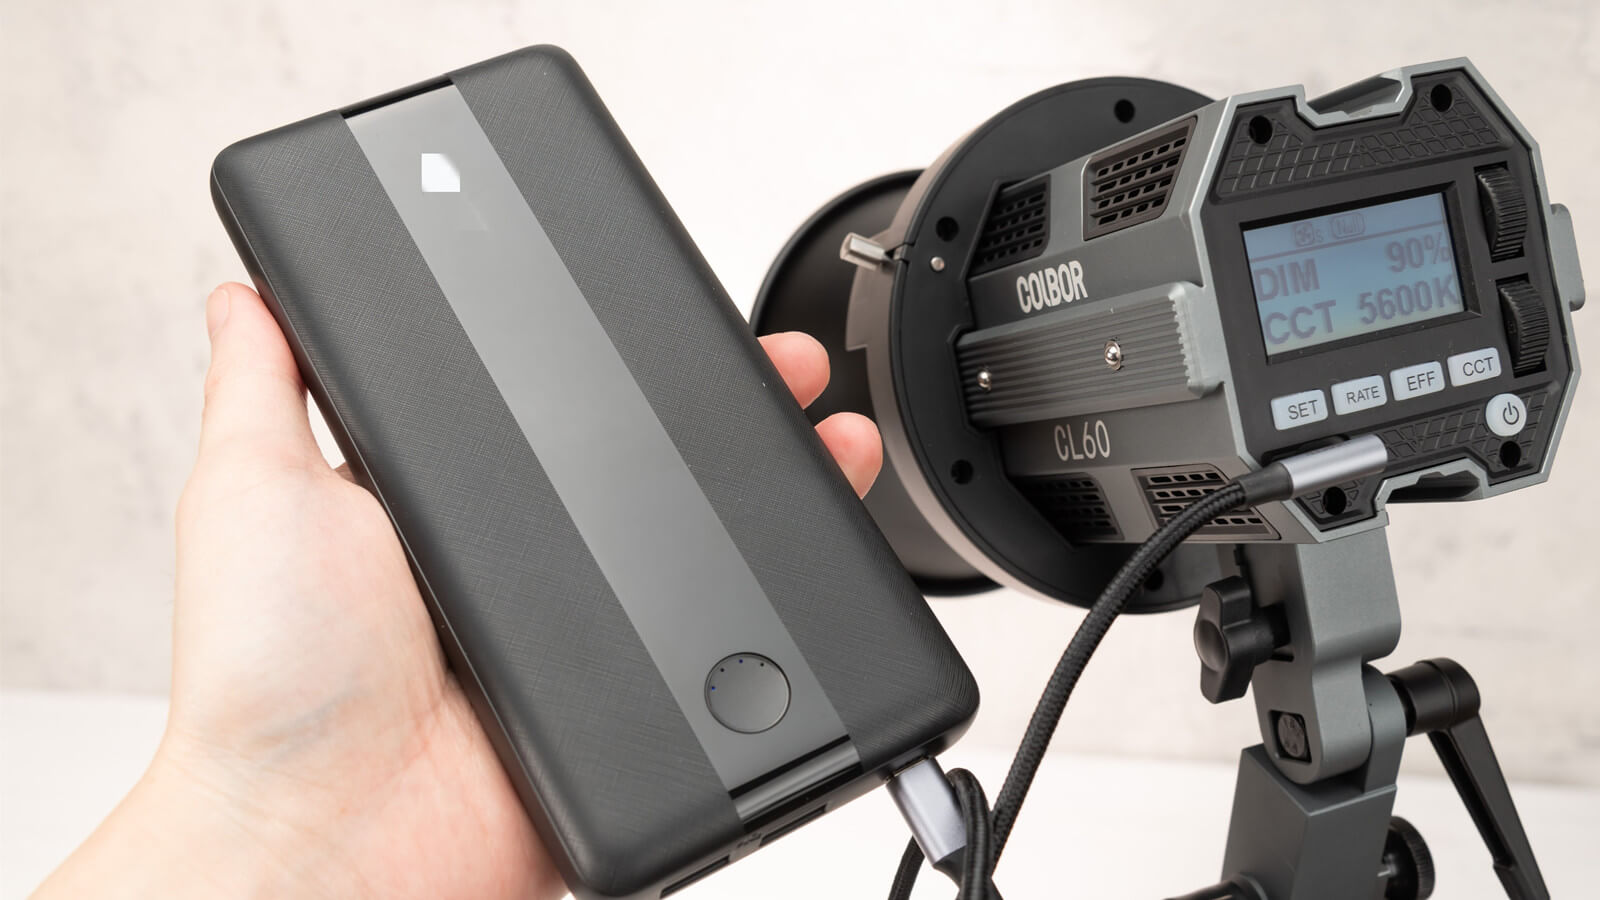 COLBOR CL60 studio light for video recording can be powered by a power bank.